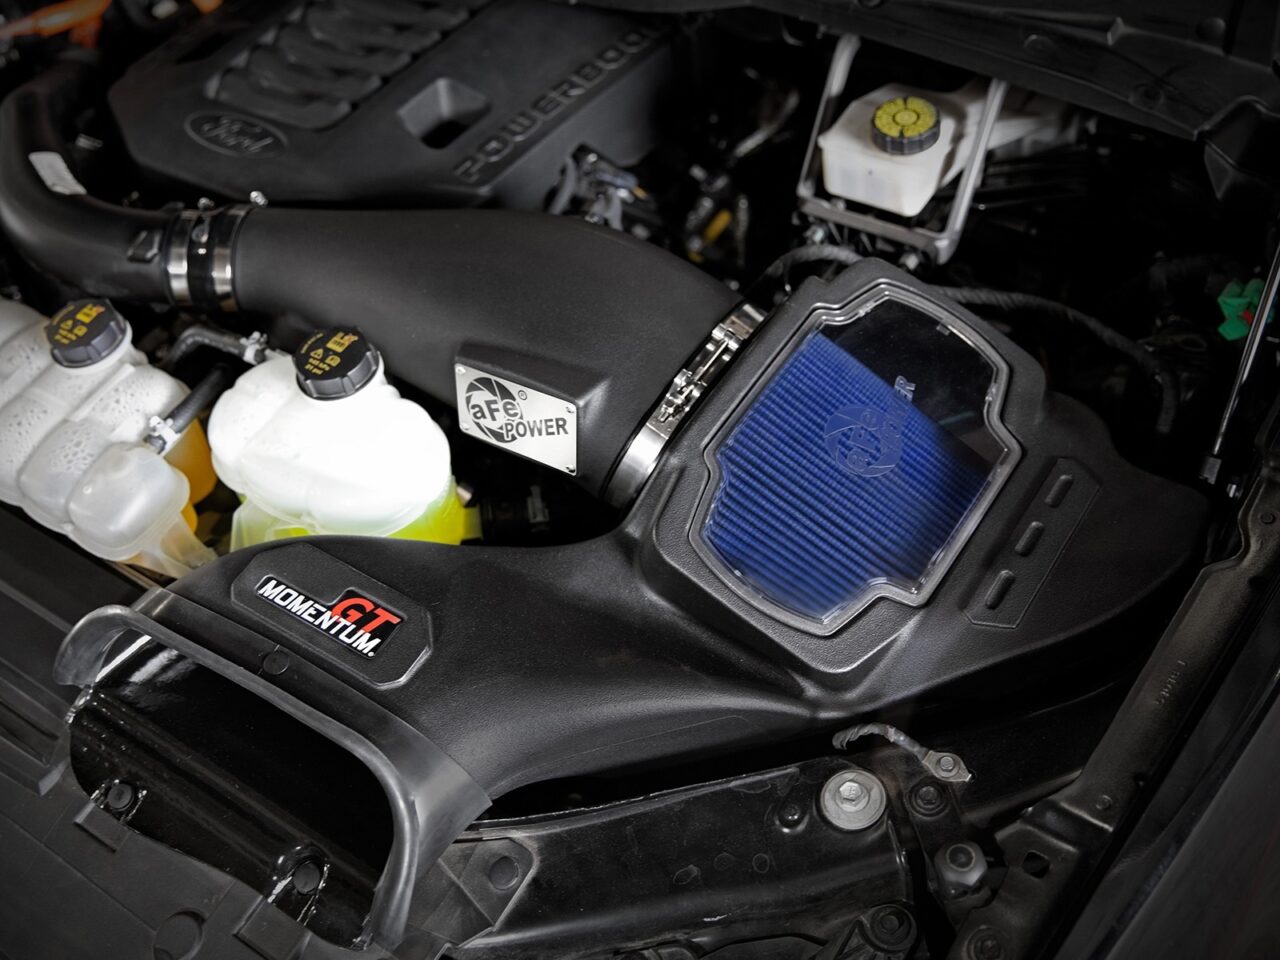 aFe POWER black rotomolded intake with blue oiled filter installed in 2022 Ford F-150 V6 engine